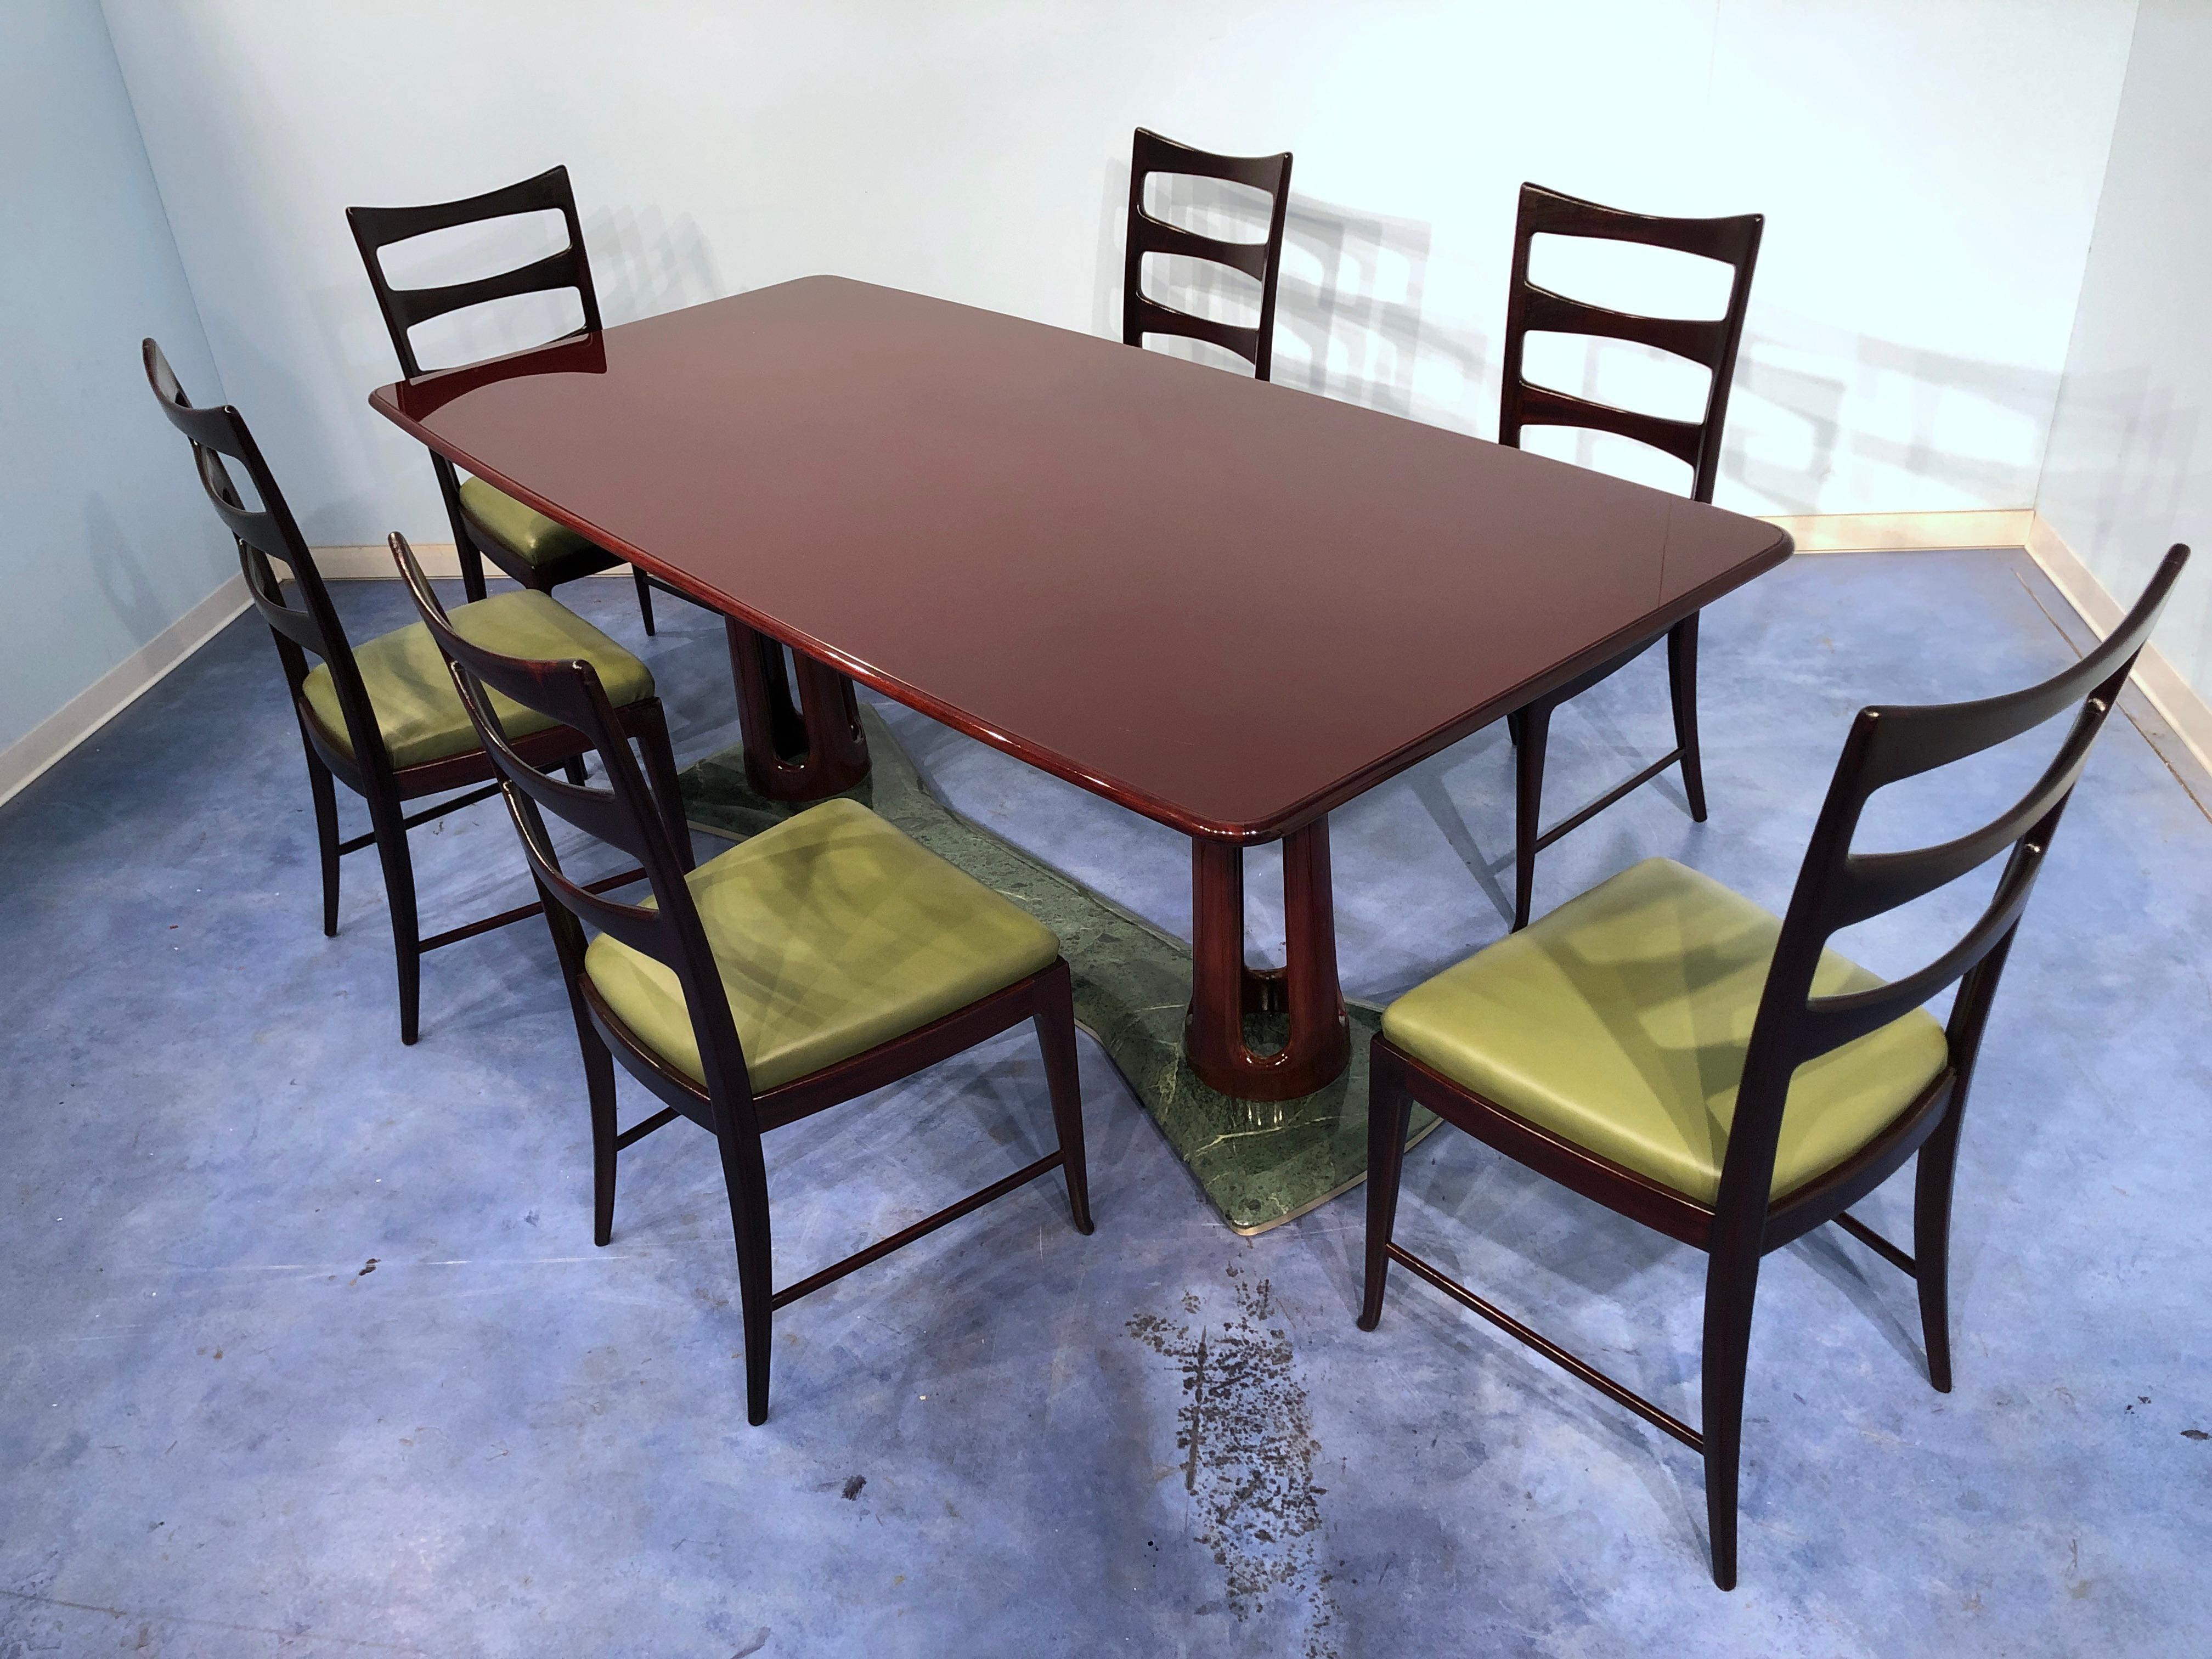 Italian Mid-Century Modern Dining Table by Vittorio Dassi, 1950s For Sale 14